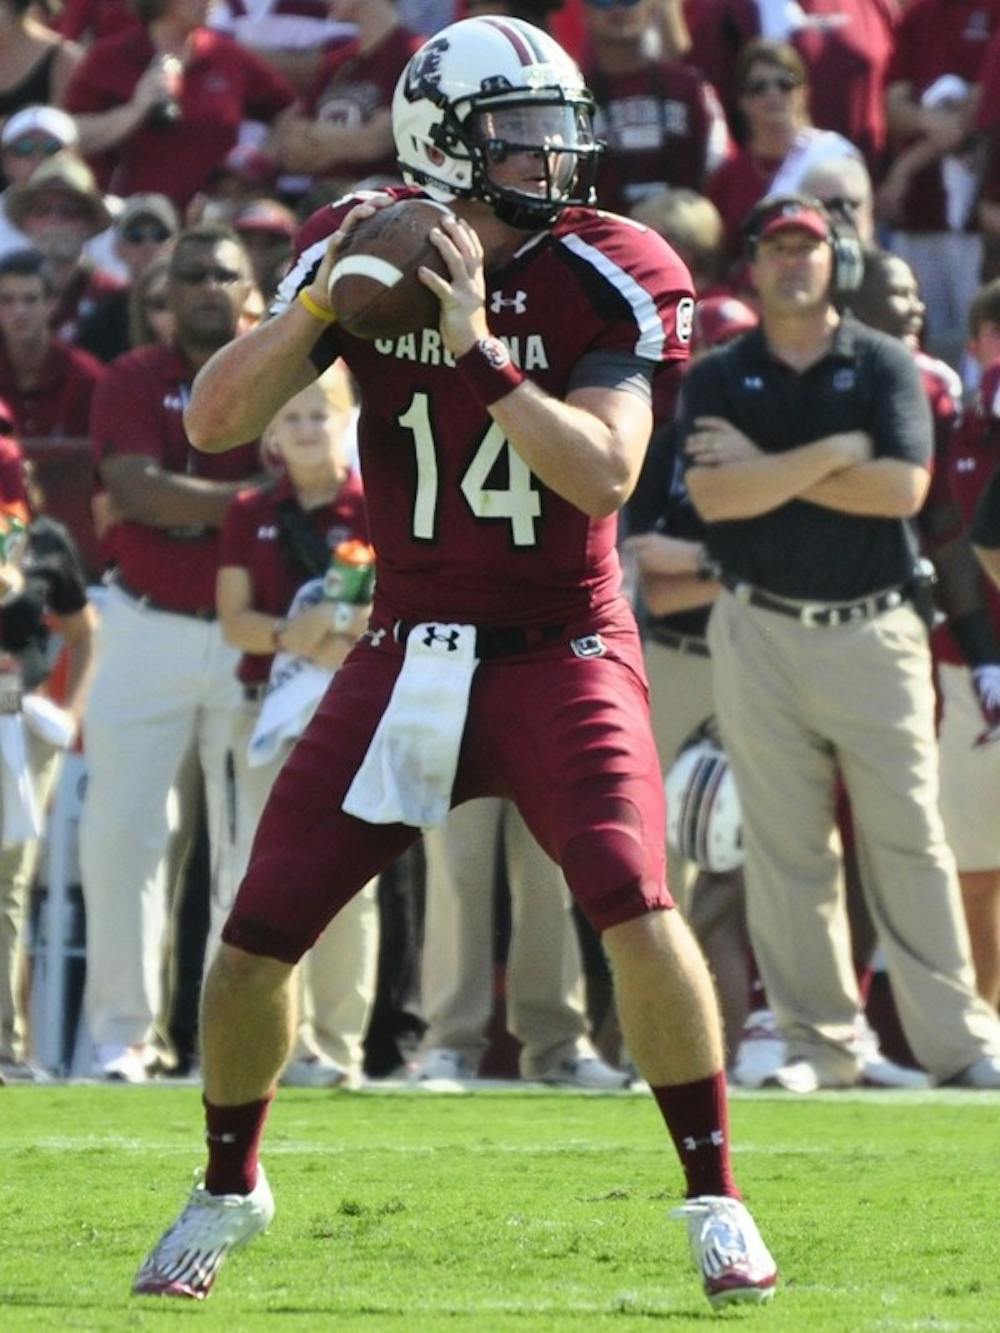 Junior quarterback Connor Shaw has completed 20 consecutive passes. The league record, held by Tennessee’s Tee Martin, is 24.